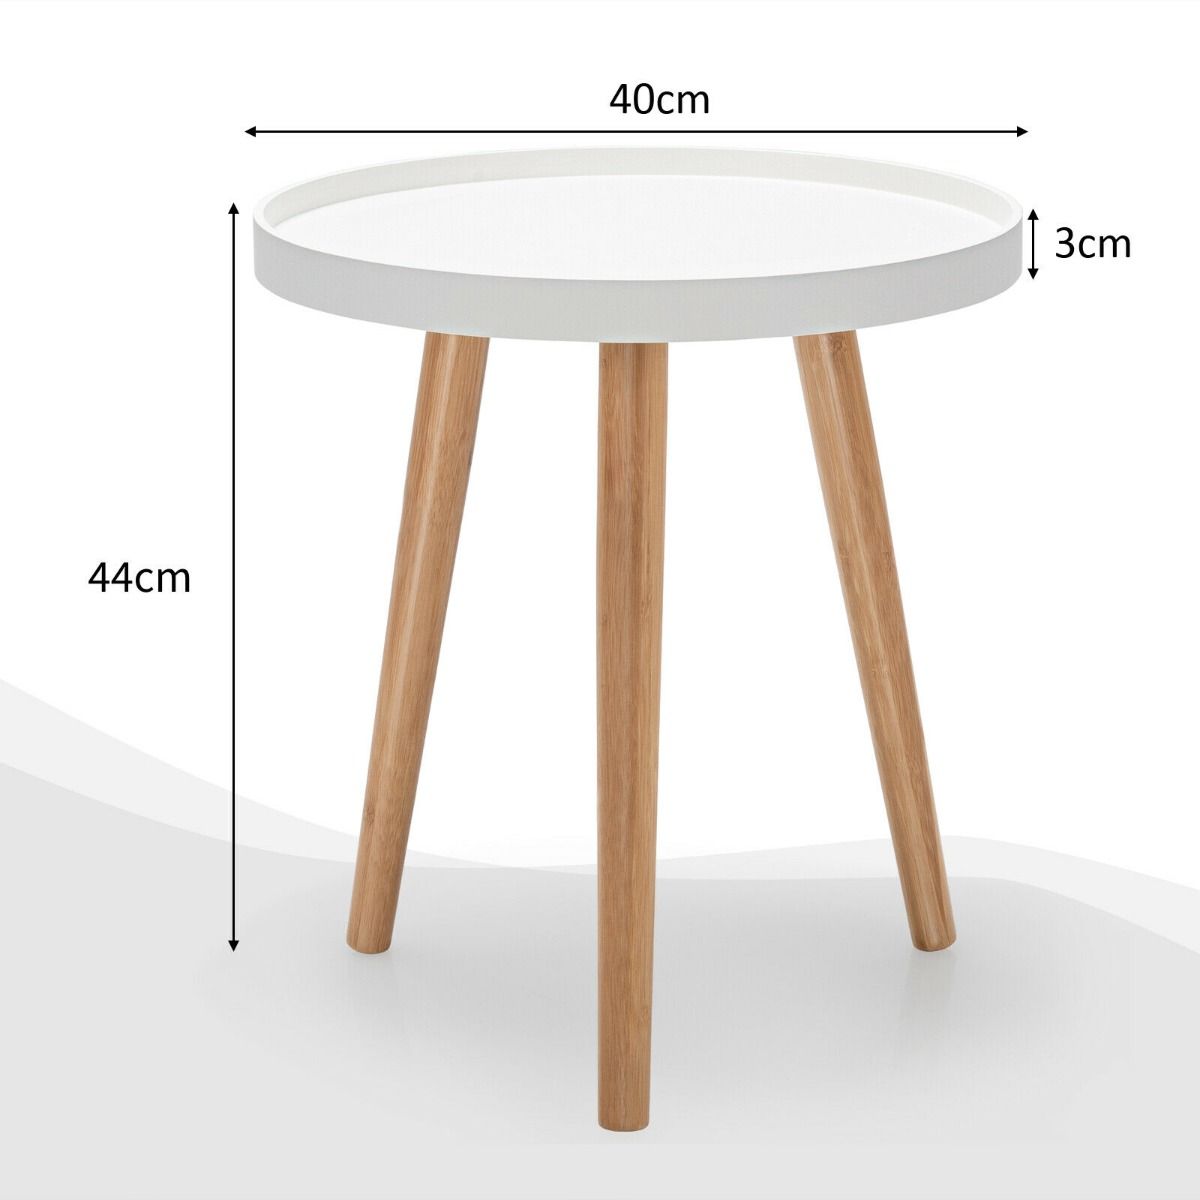 Round Wooden Tripod Coffee Table